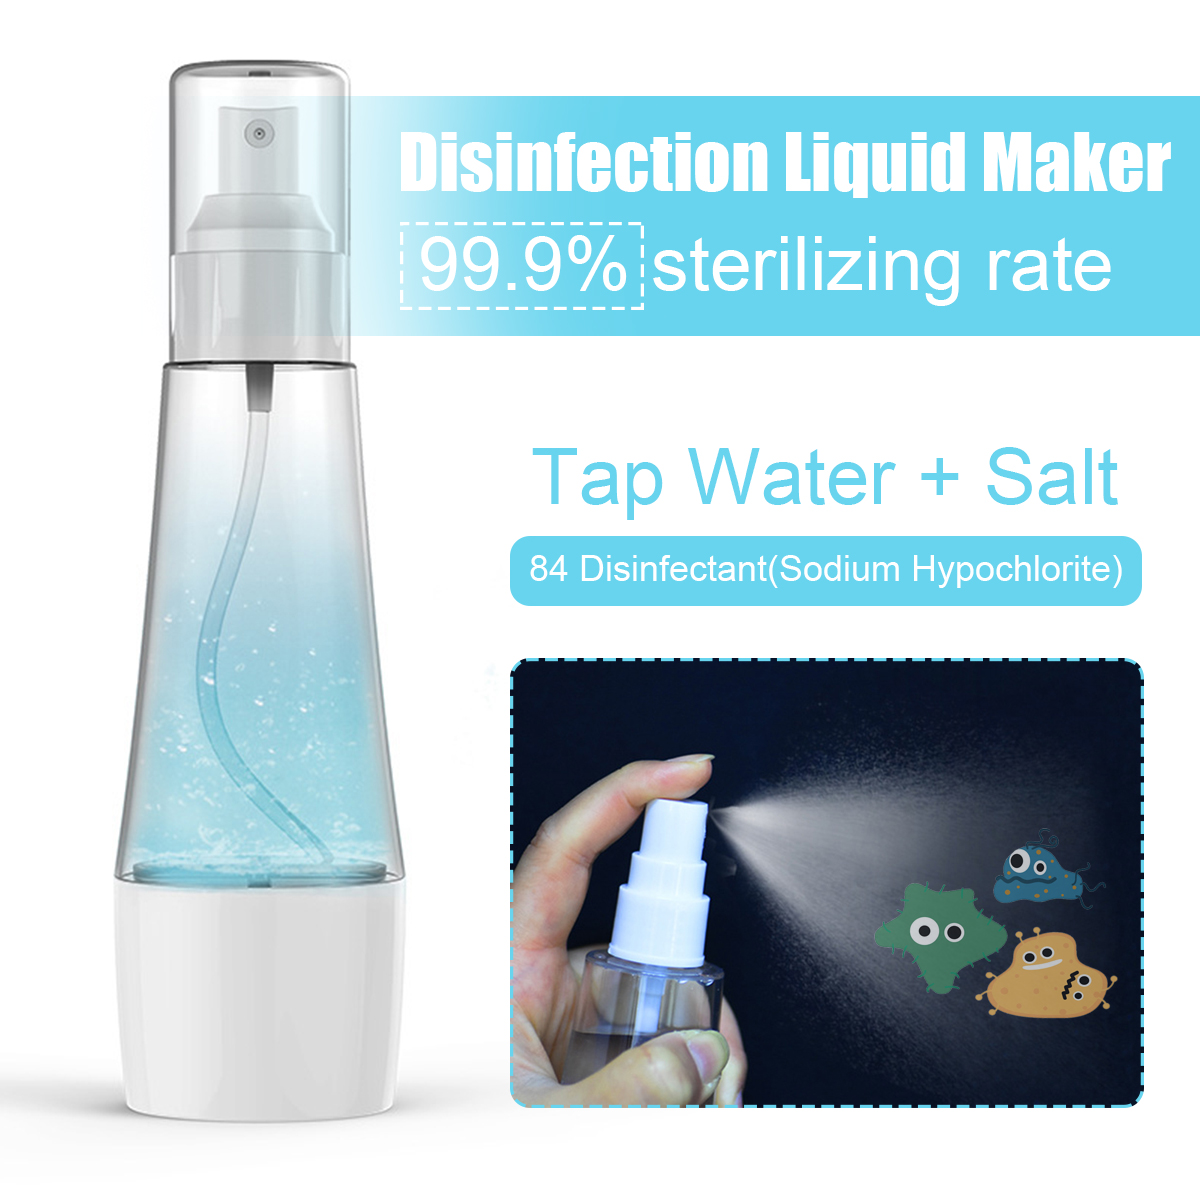 Portable-Sodium-Hypochlorite-Disinfectant-Generator-Disinfection-Water-Maker-1665111-1